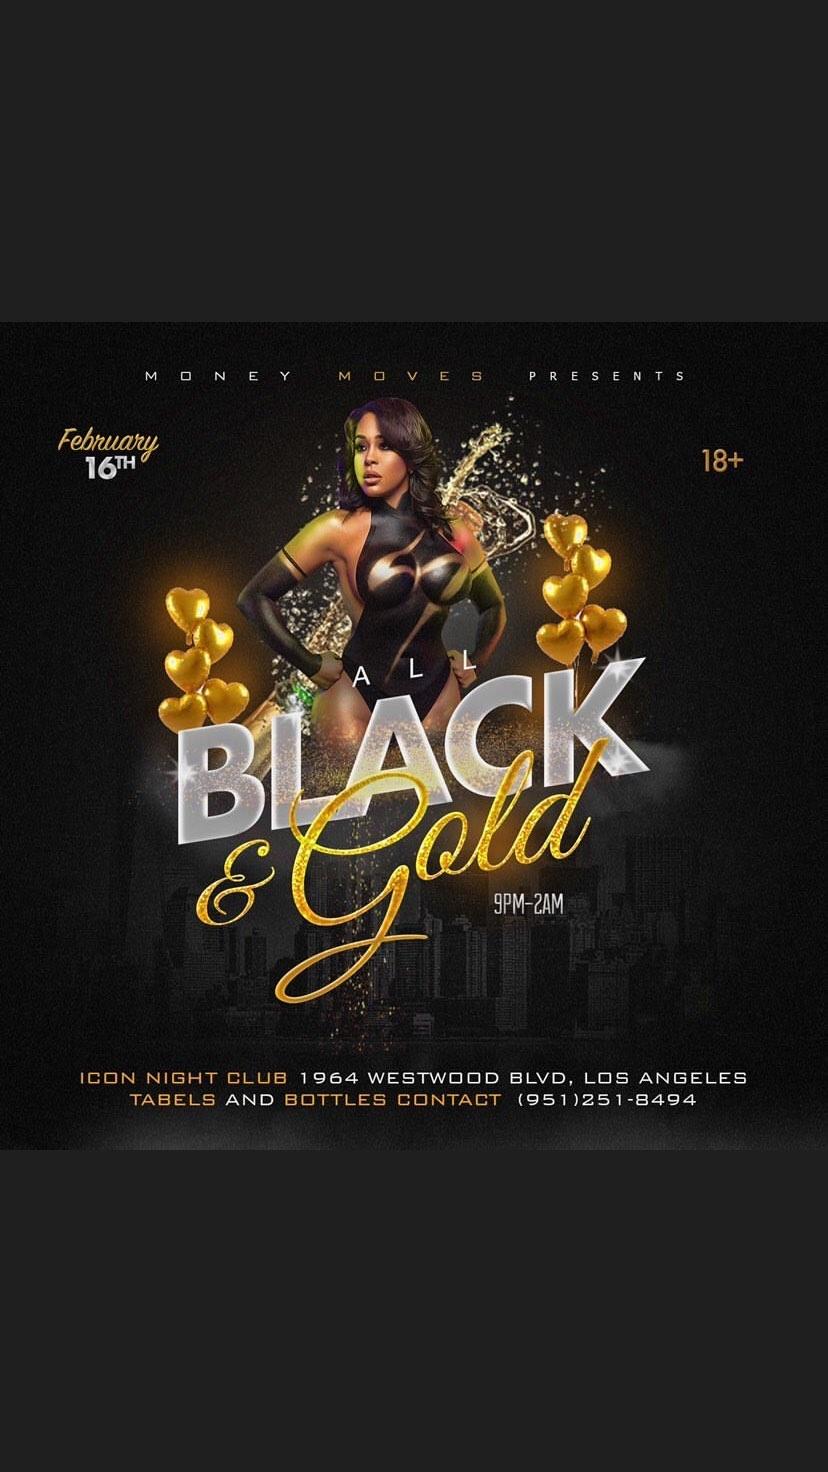 black & gold party